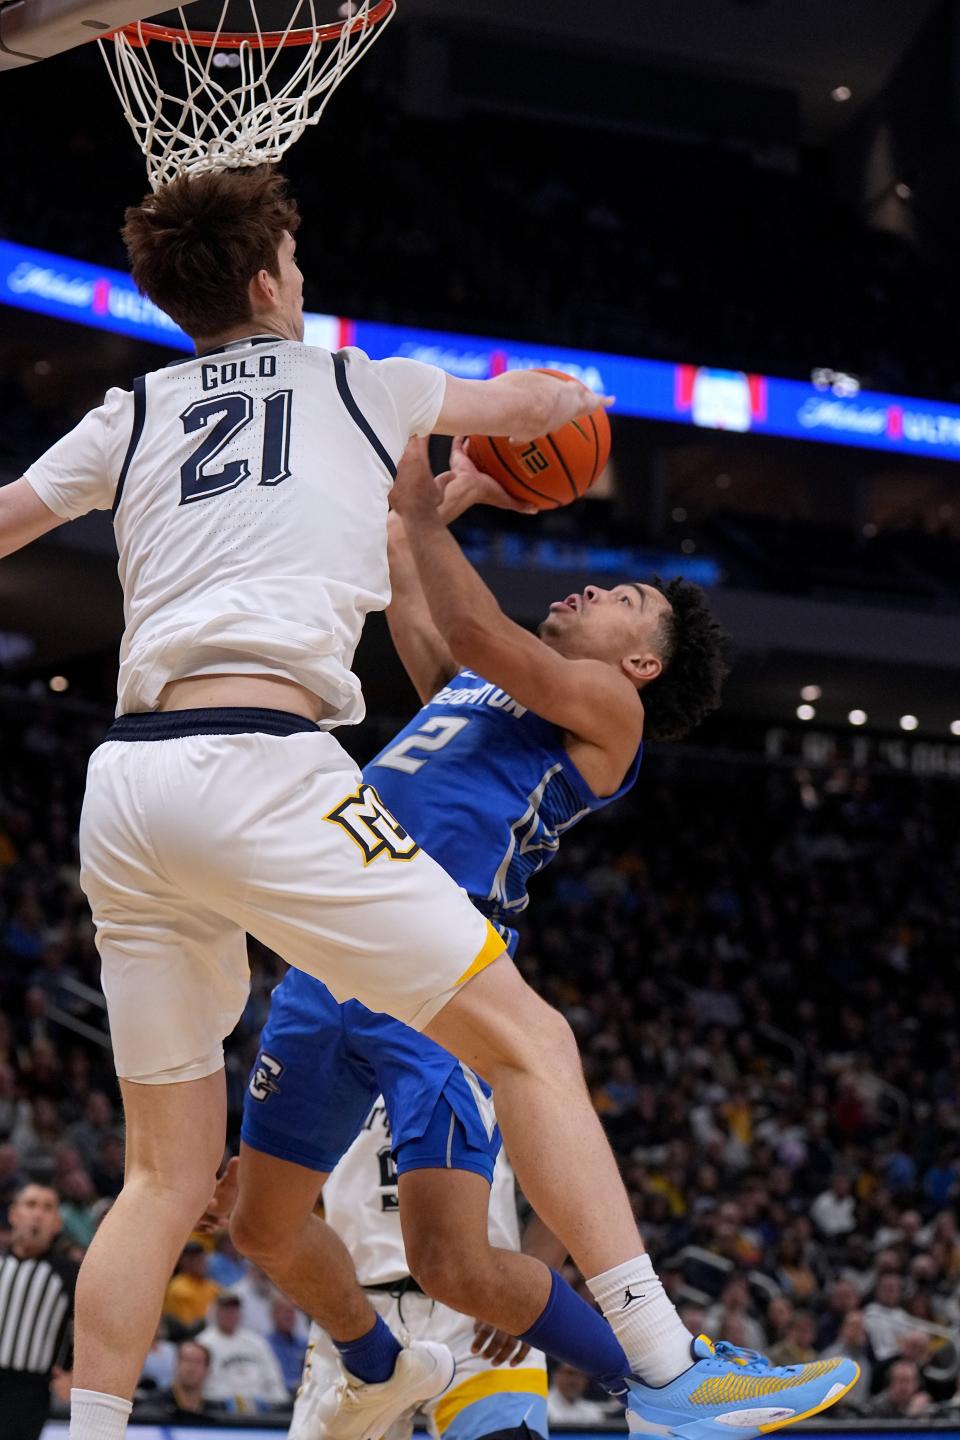 Marquette forward Ben Gold blocks a shot by Creighton guard Ryan Nembhard during the second half Friday at Fiserv Forum. The Golden Eagles' aggressive defense forced Creighton into 18 turnovers.